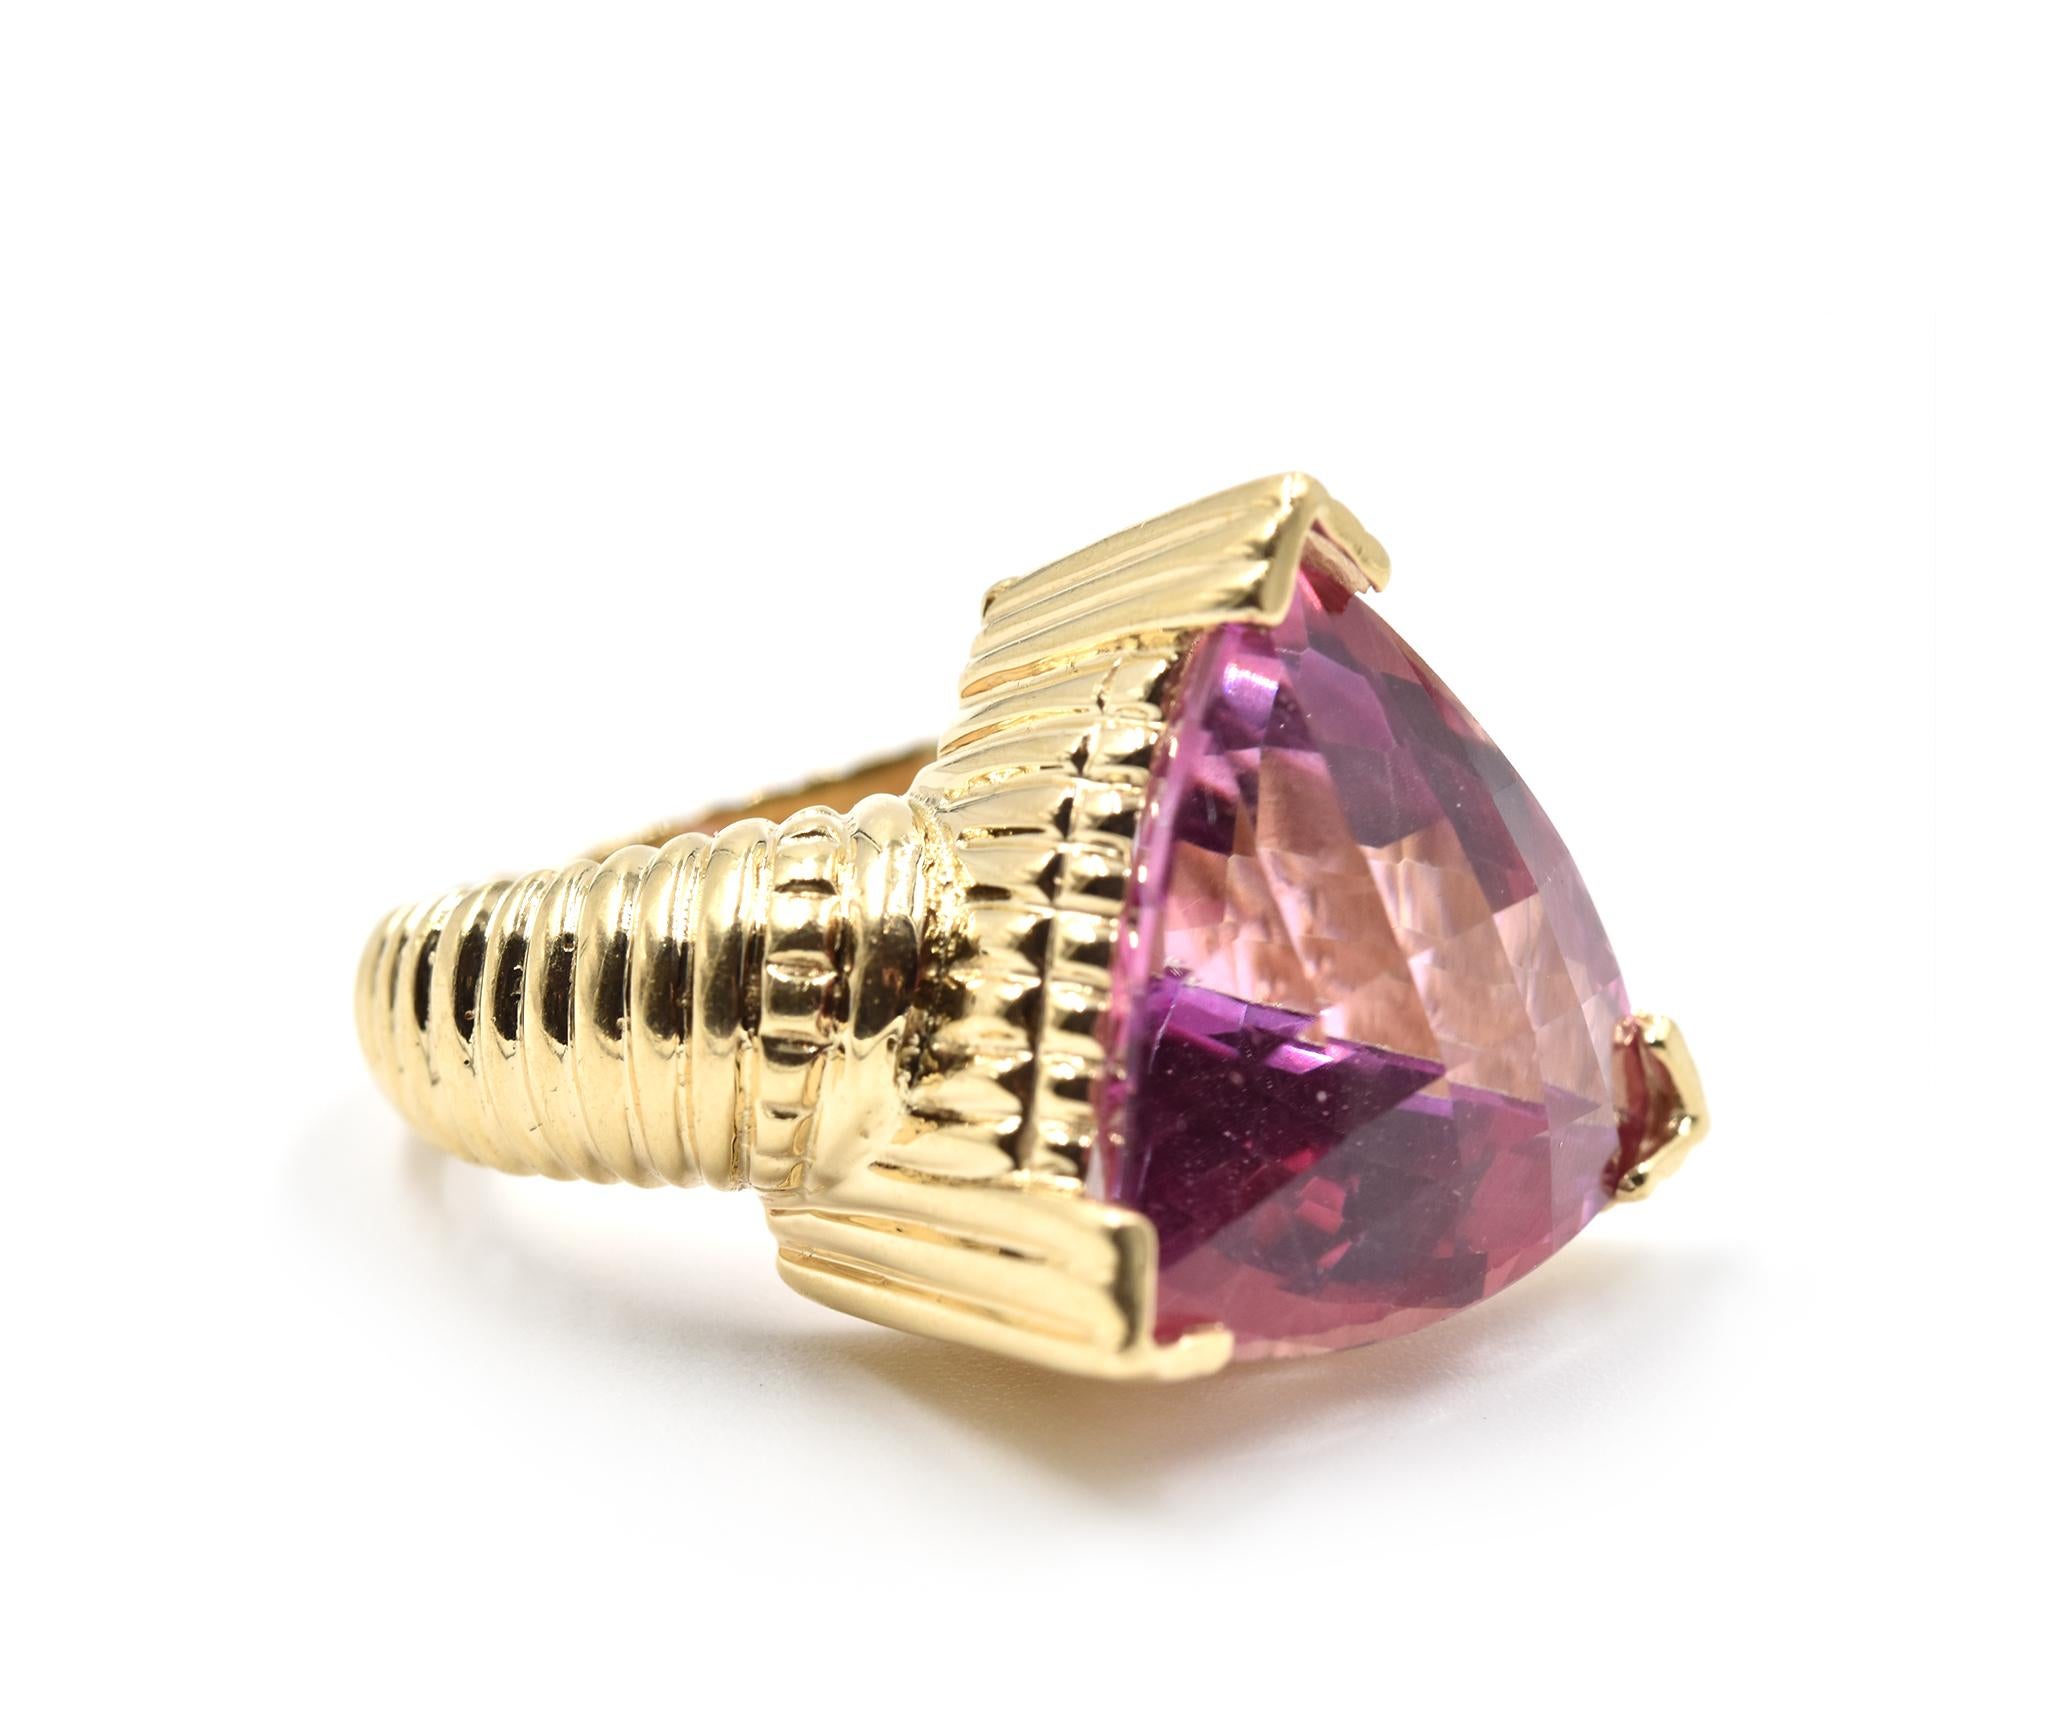 Designer: custom design
Material: 14k yellow gold
Center Stone: trilliant cut pink tourmaline
Dimensions: ring is 3/4-inch long and 3/4-inch wide
Ring Size: 5 1/4 (please allow two additional shipping days for sizing requests)
Weight: 19.20 grams
